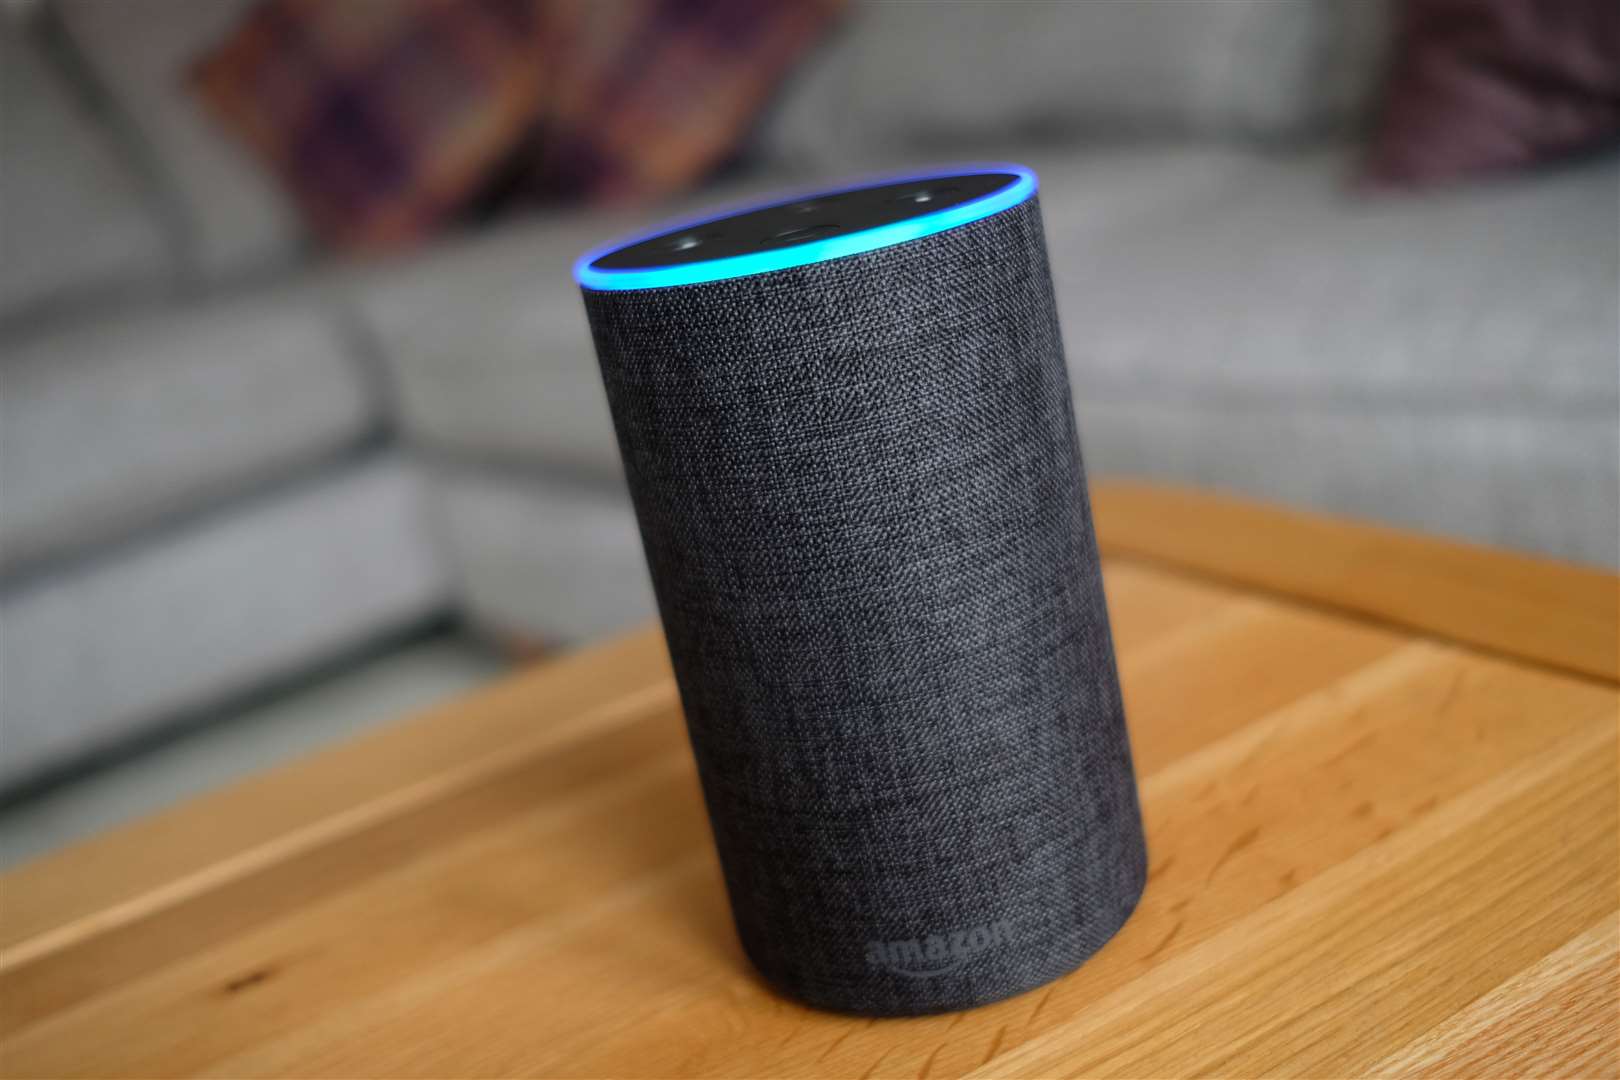 Amazon’s Alexa down for users in UK